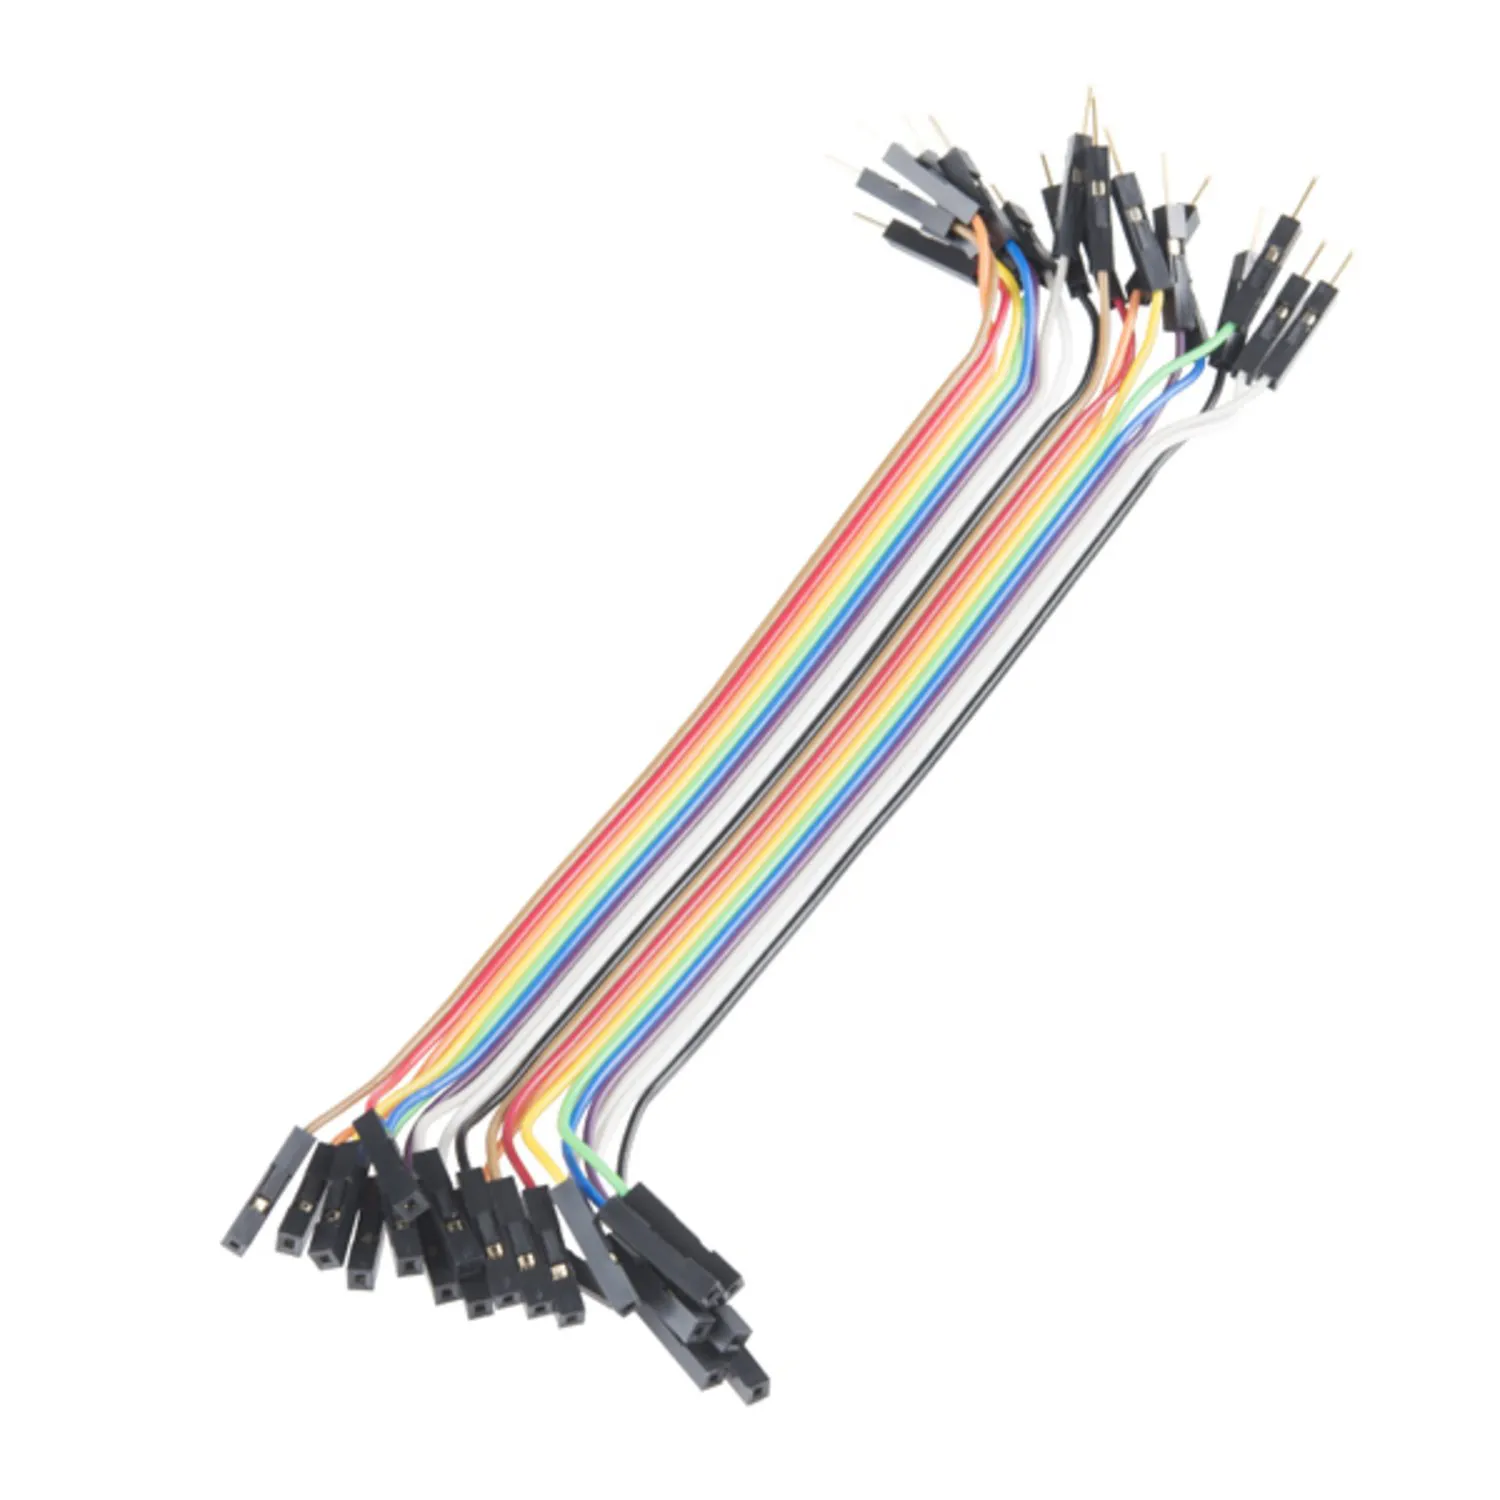 Photo of Jumper Wires - Connected 6 (M/F, 20 pack)